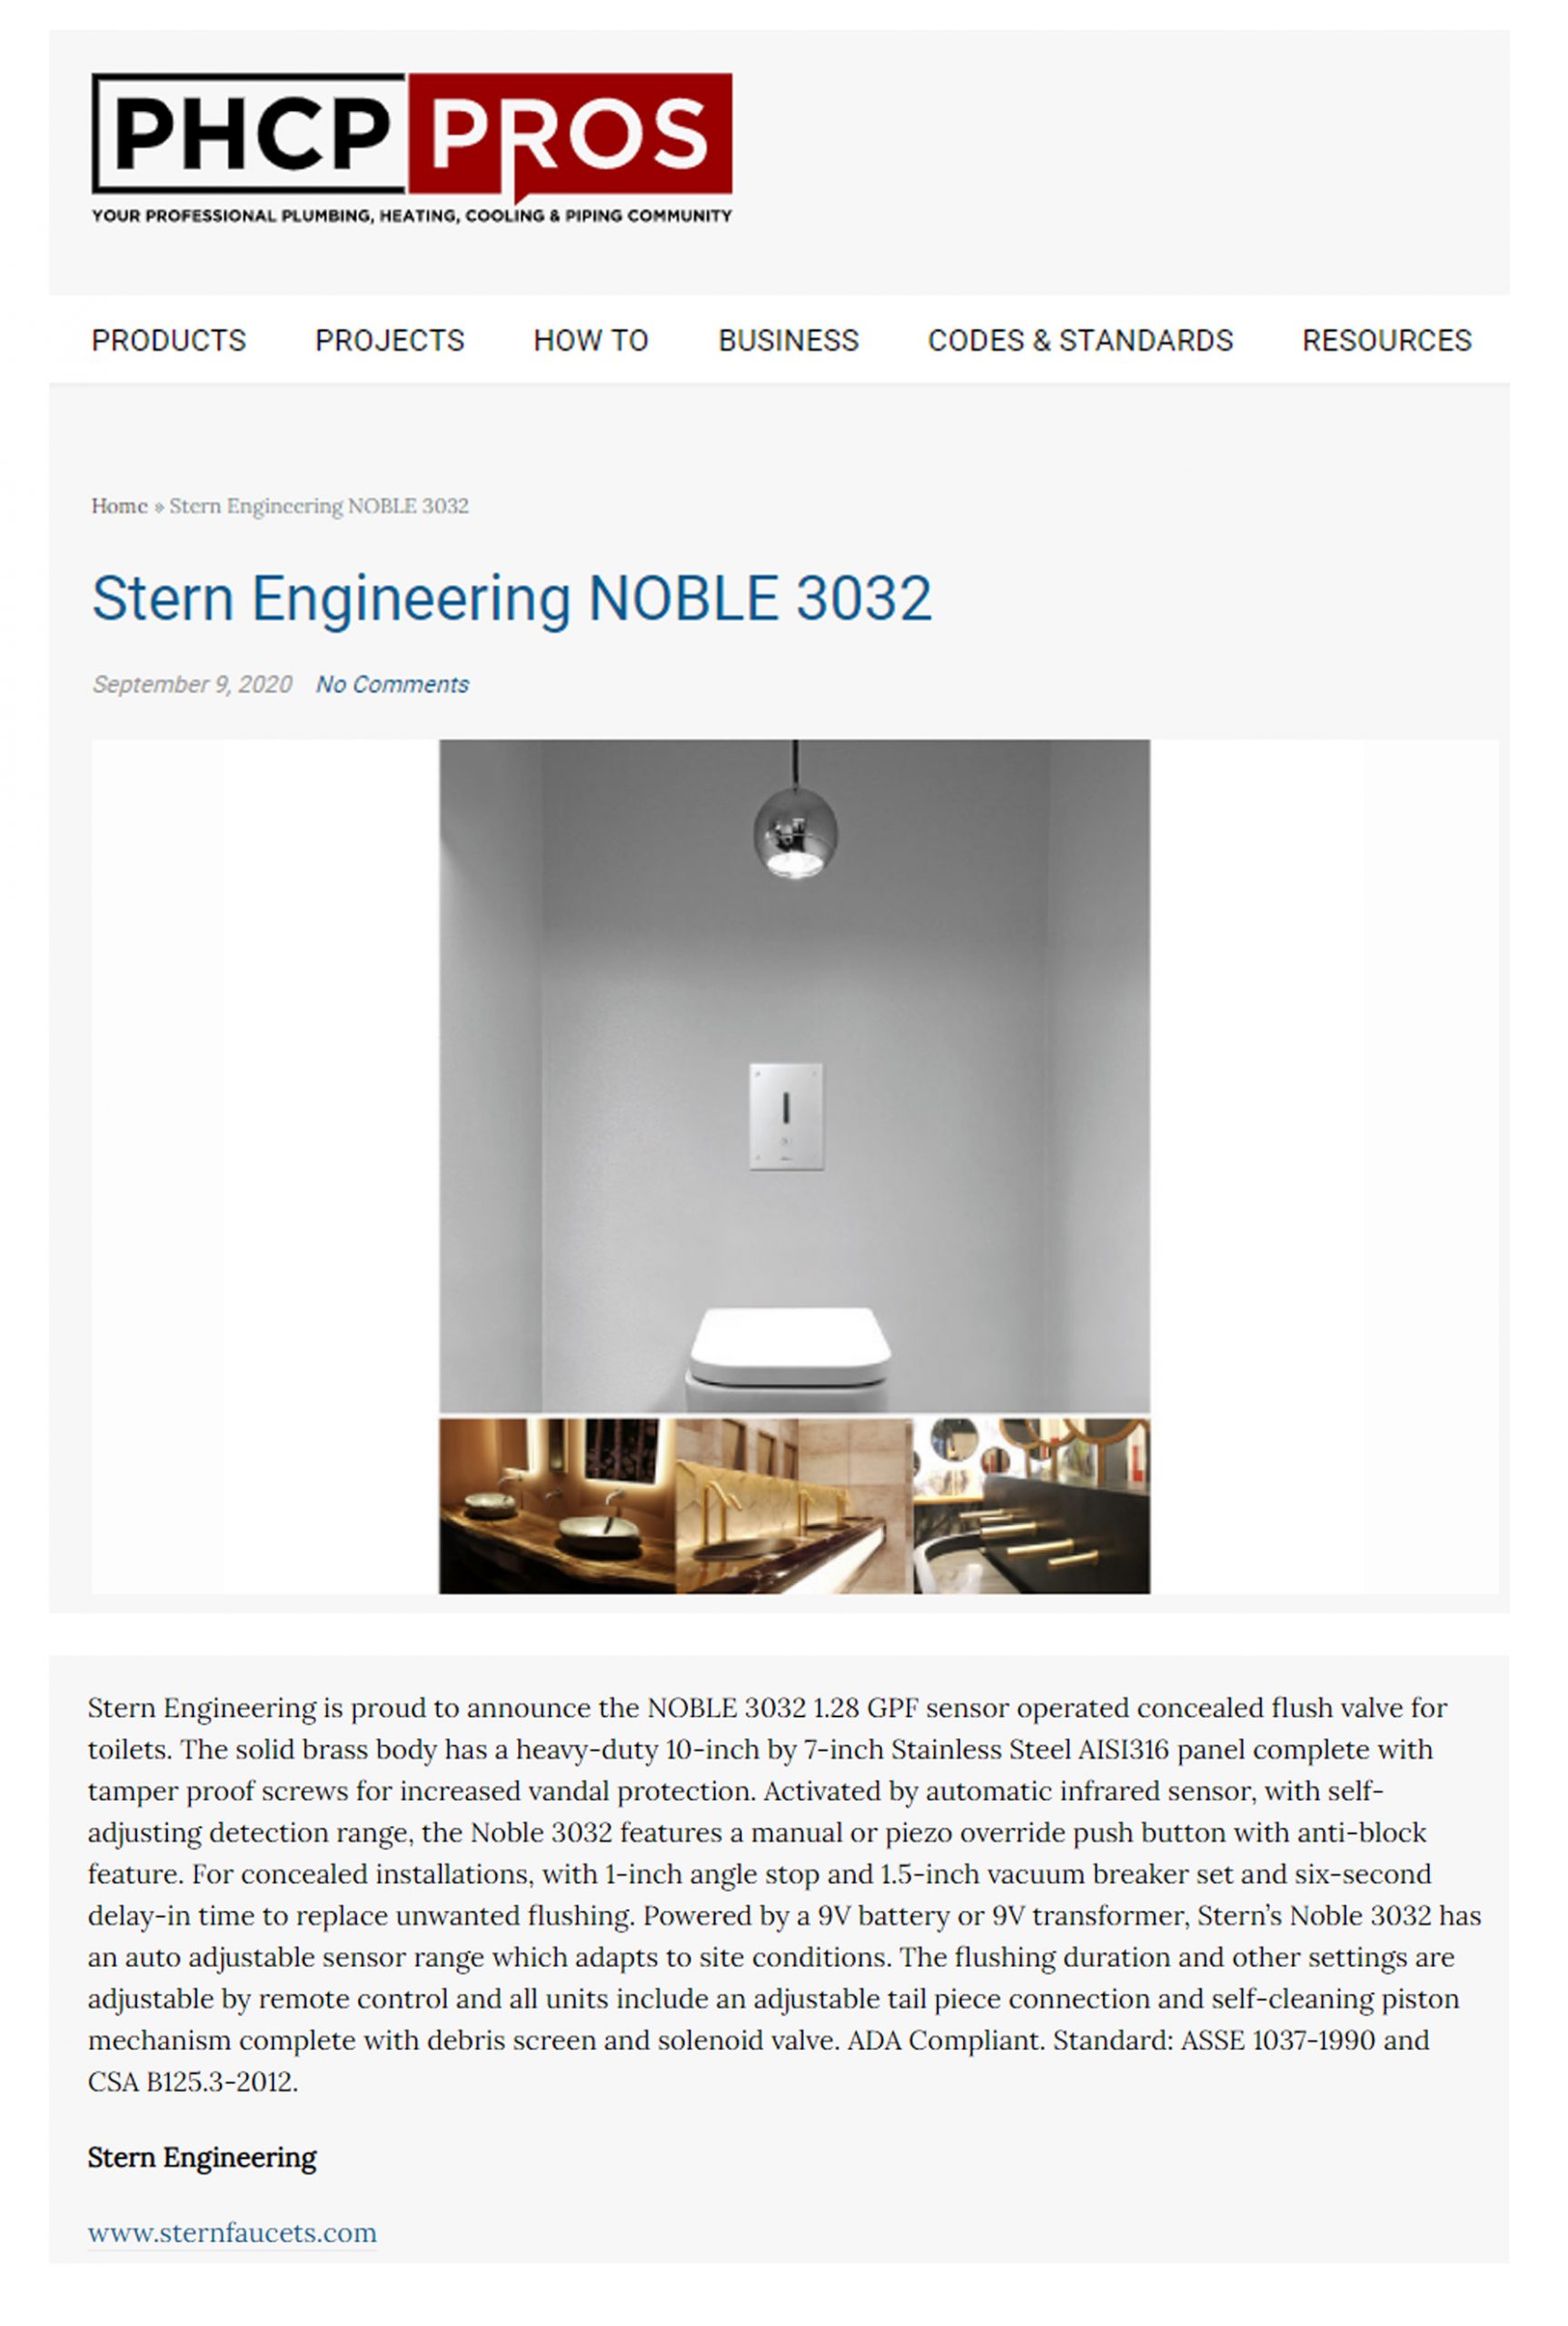 You are currently viewing Stern’S Noble 3032 1.28 GPF Touchless Concealed Flush Valve For Toilets Featured In PHCP Pros